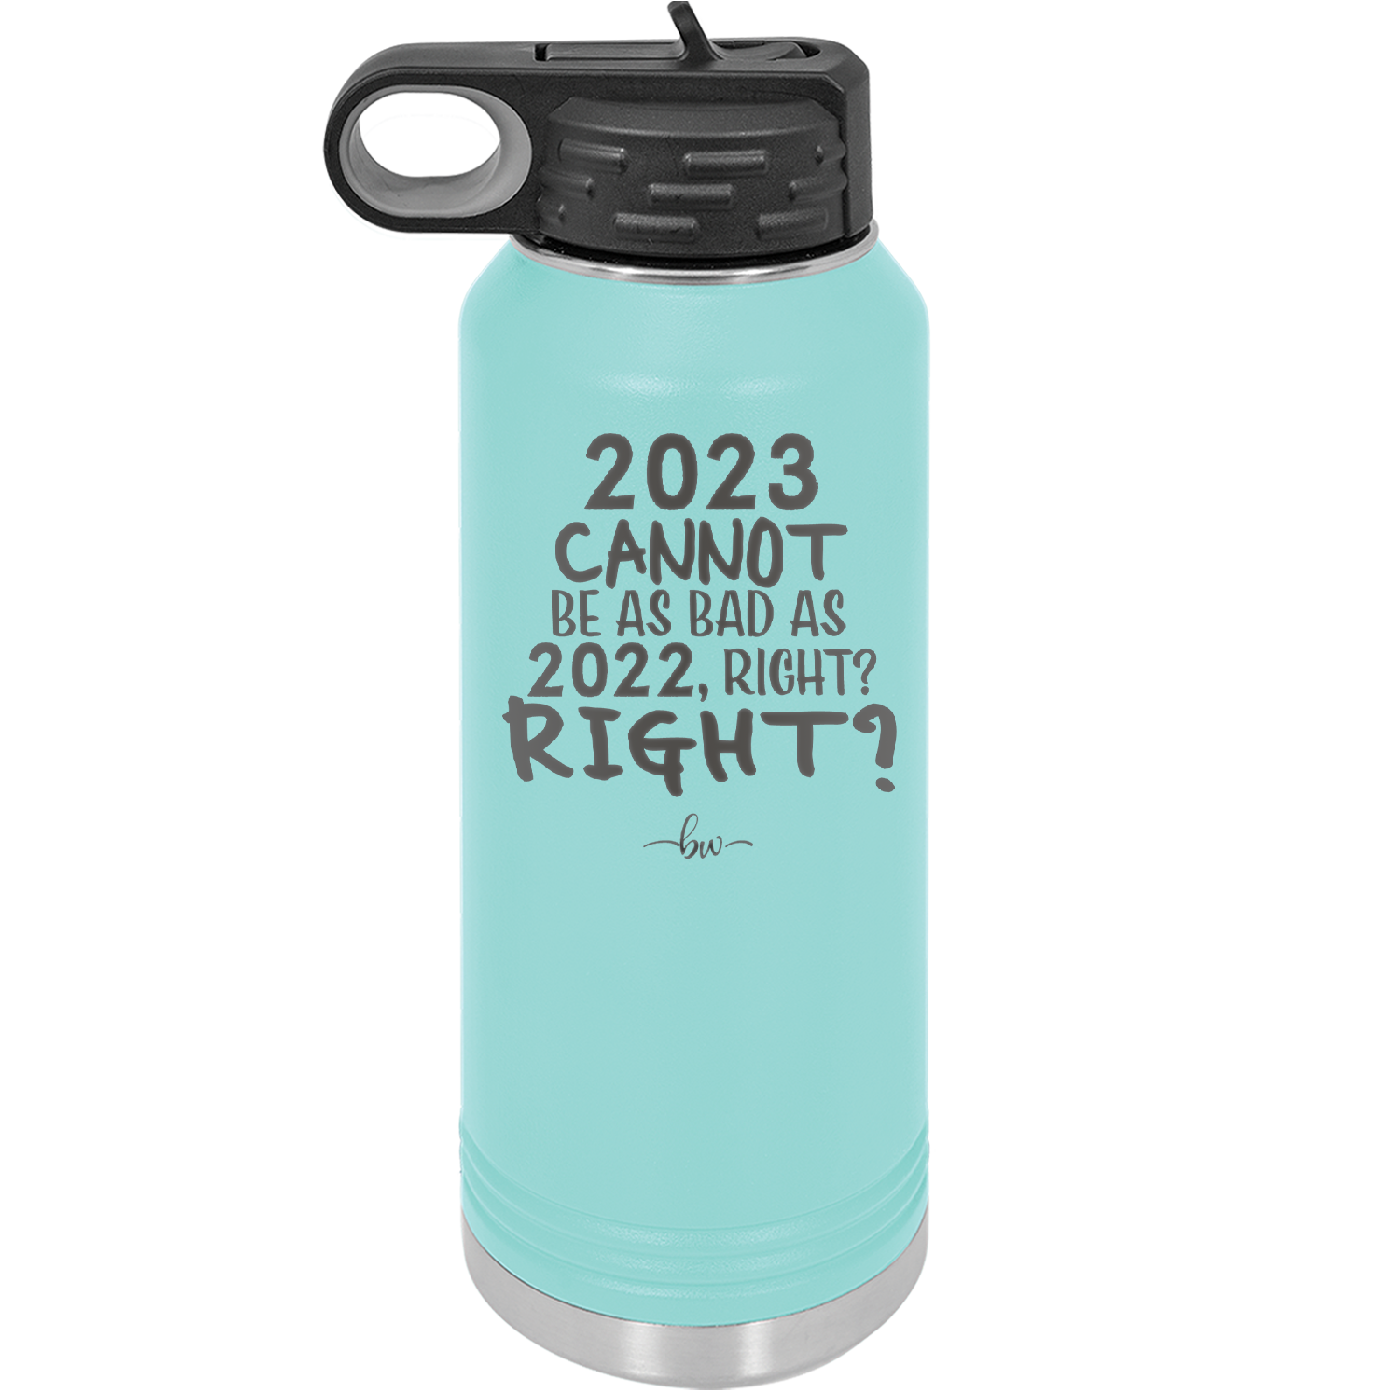 32 oz water bottle 2023 cannot be as bas as 2022, right?right? -  seafoam